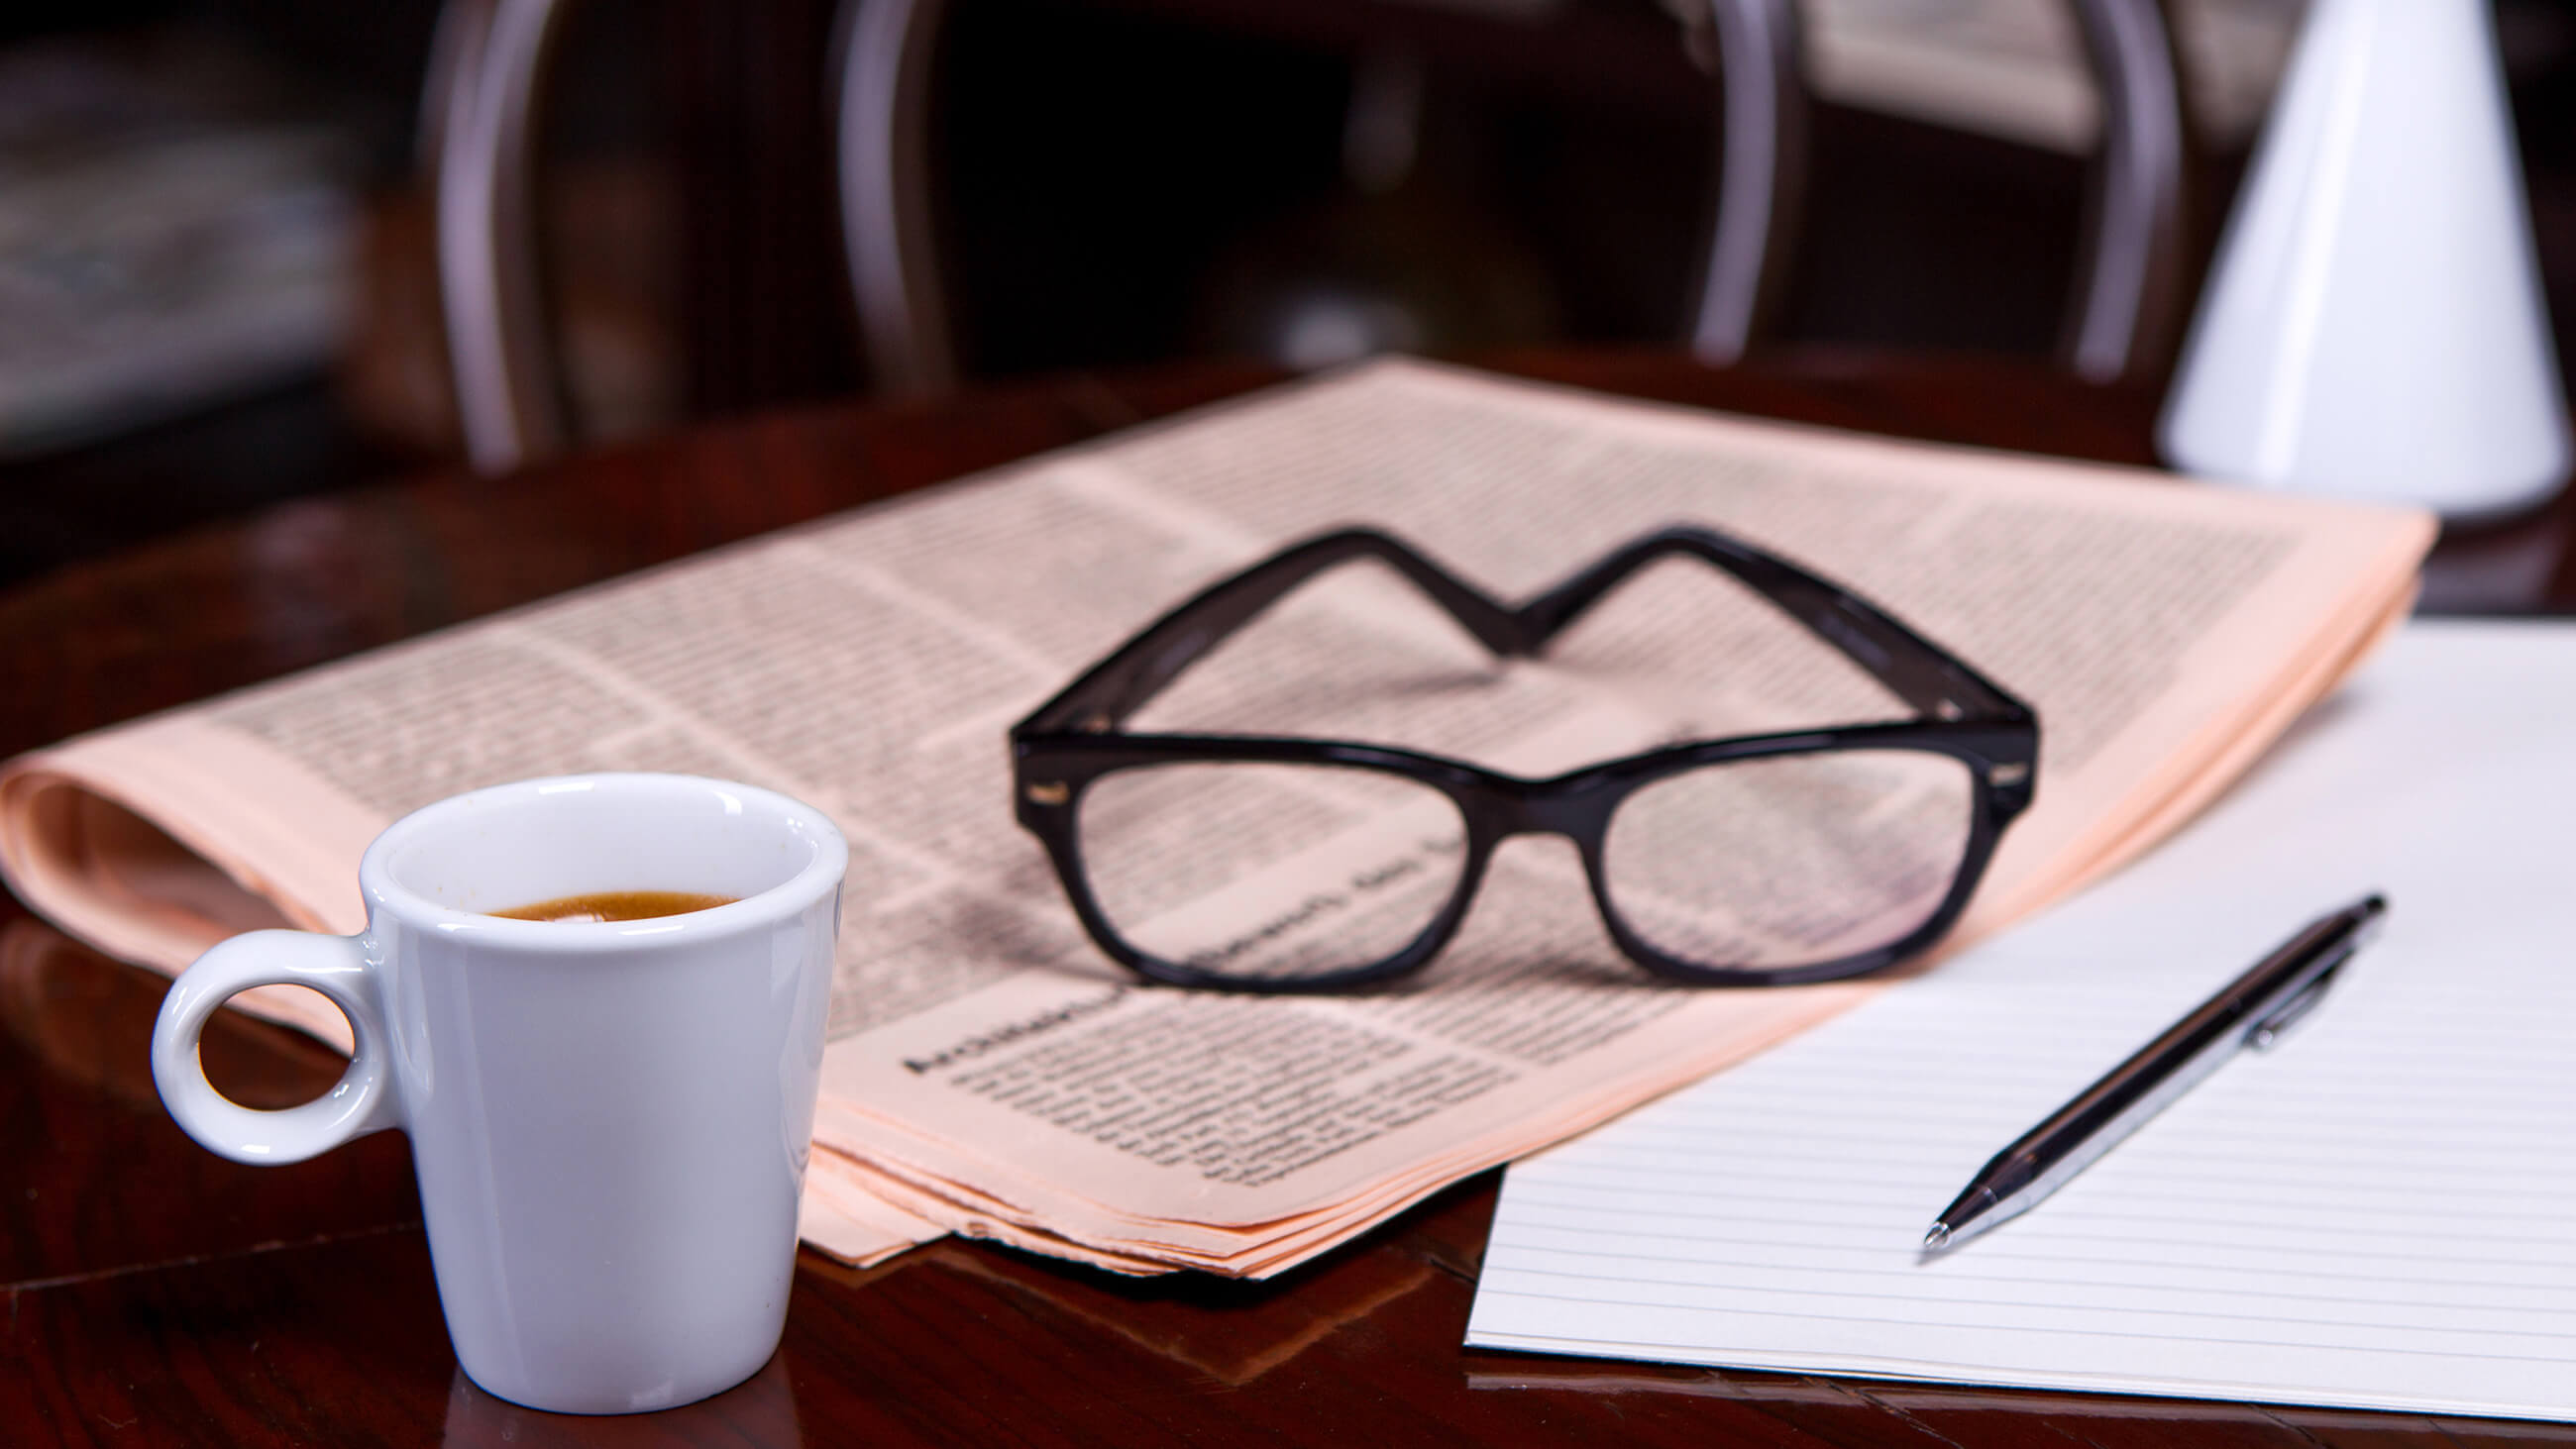 reading glasses over a newspaper with a cup of coffee, paper, and pen next to it